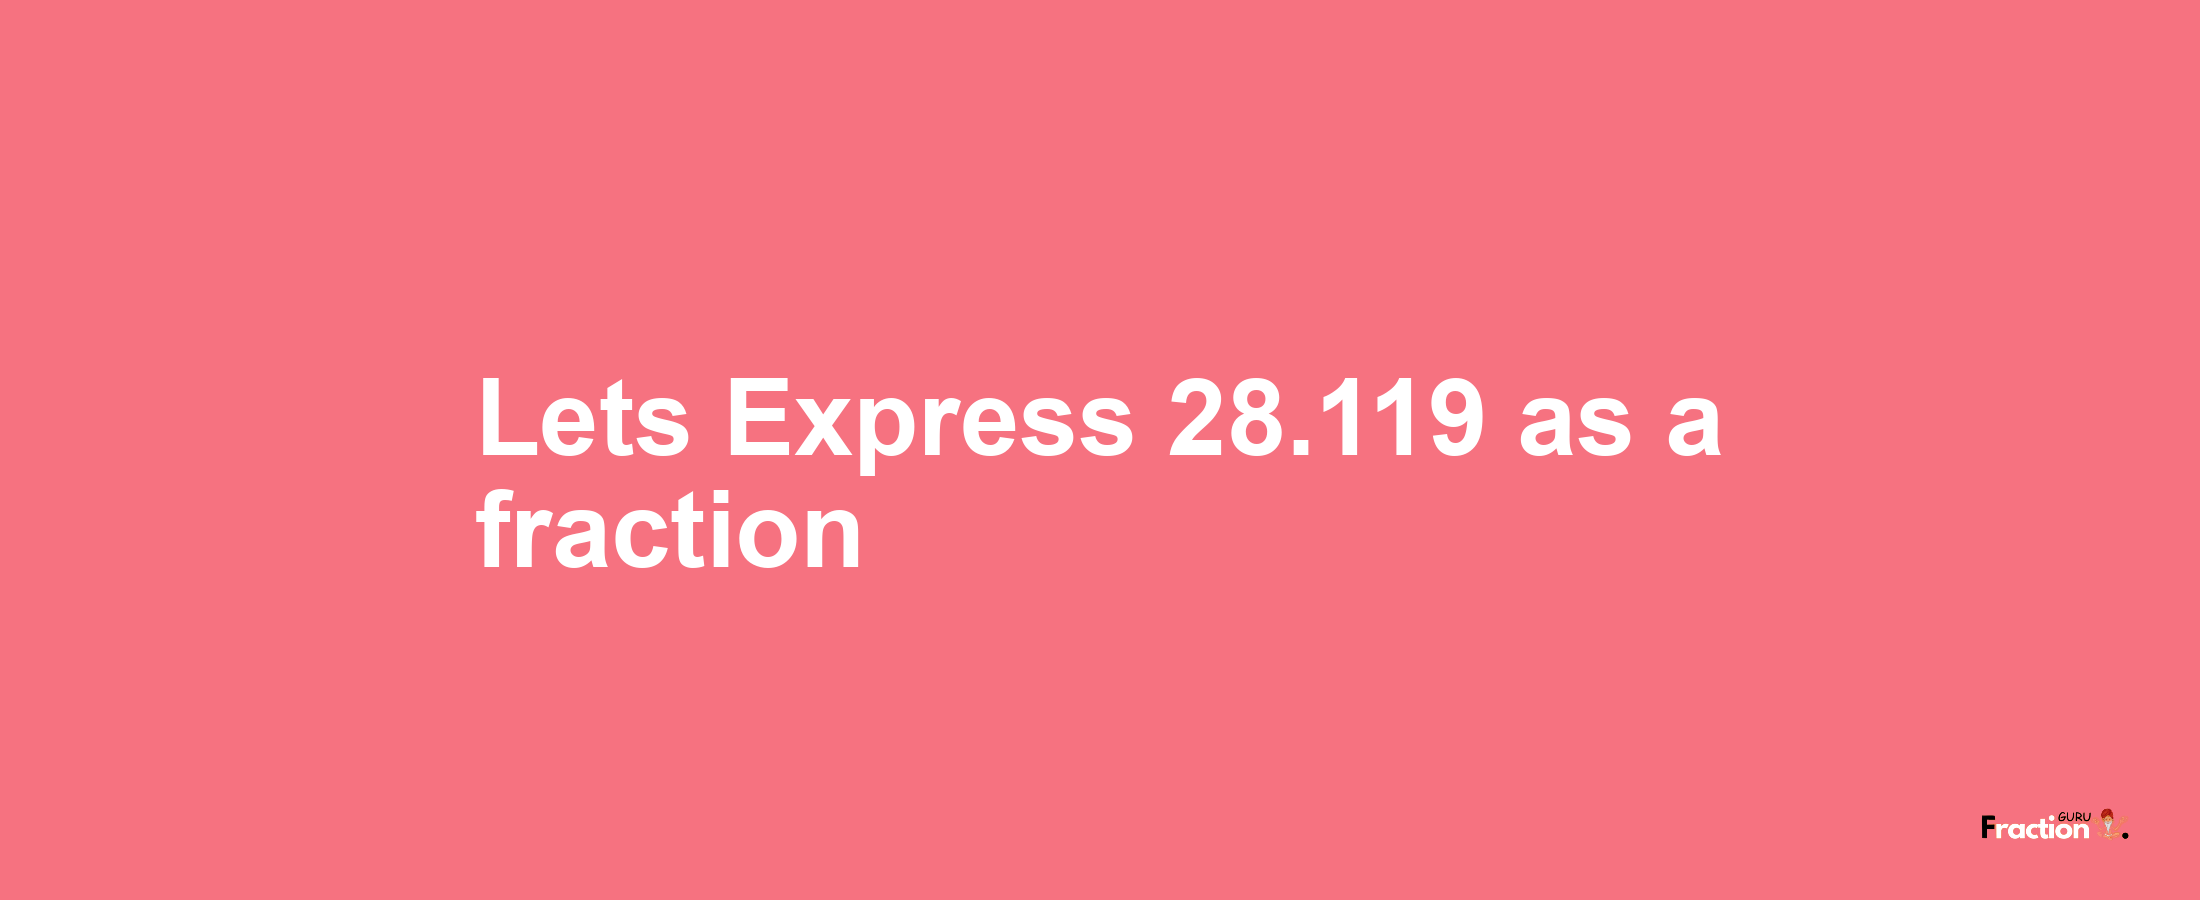 Lets Express 28.119 as afraction